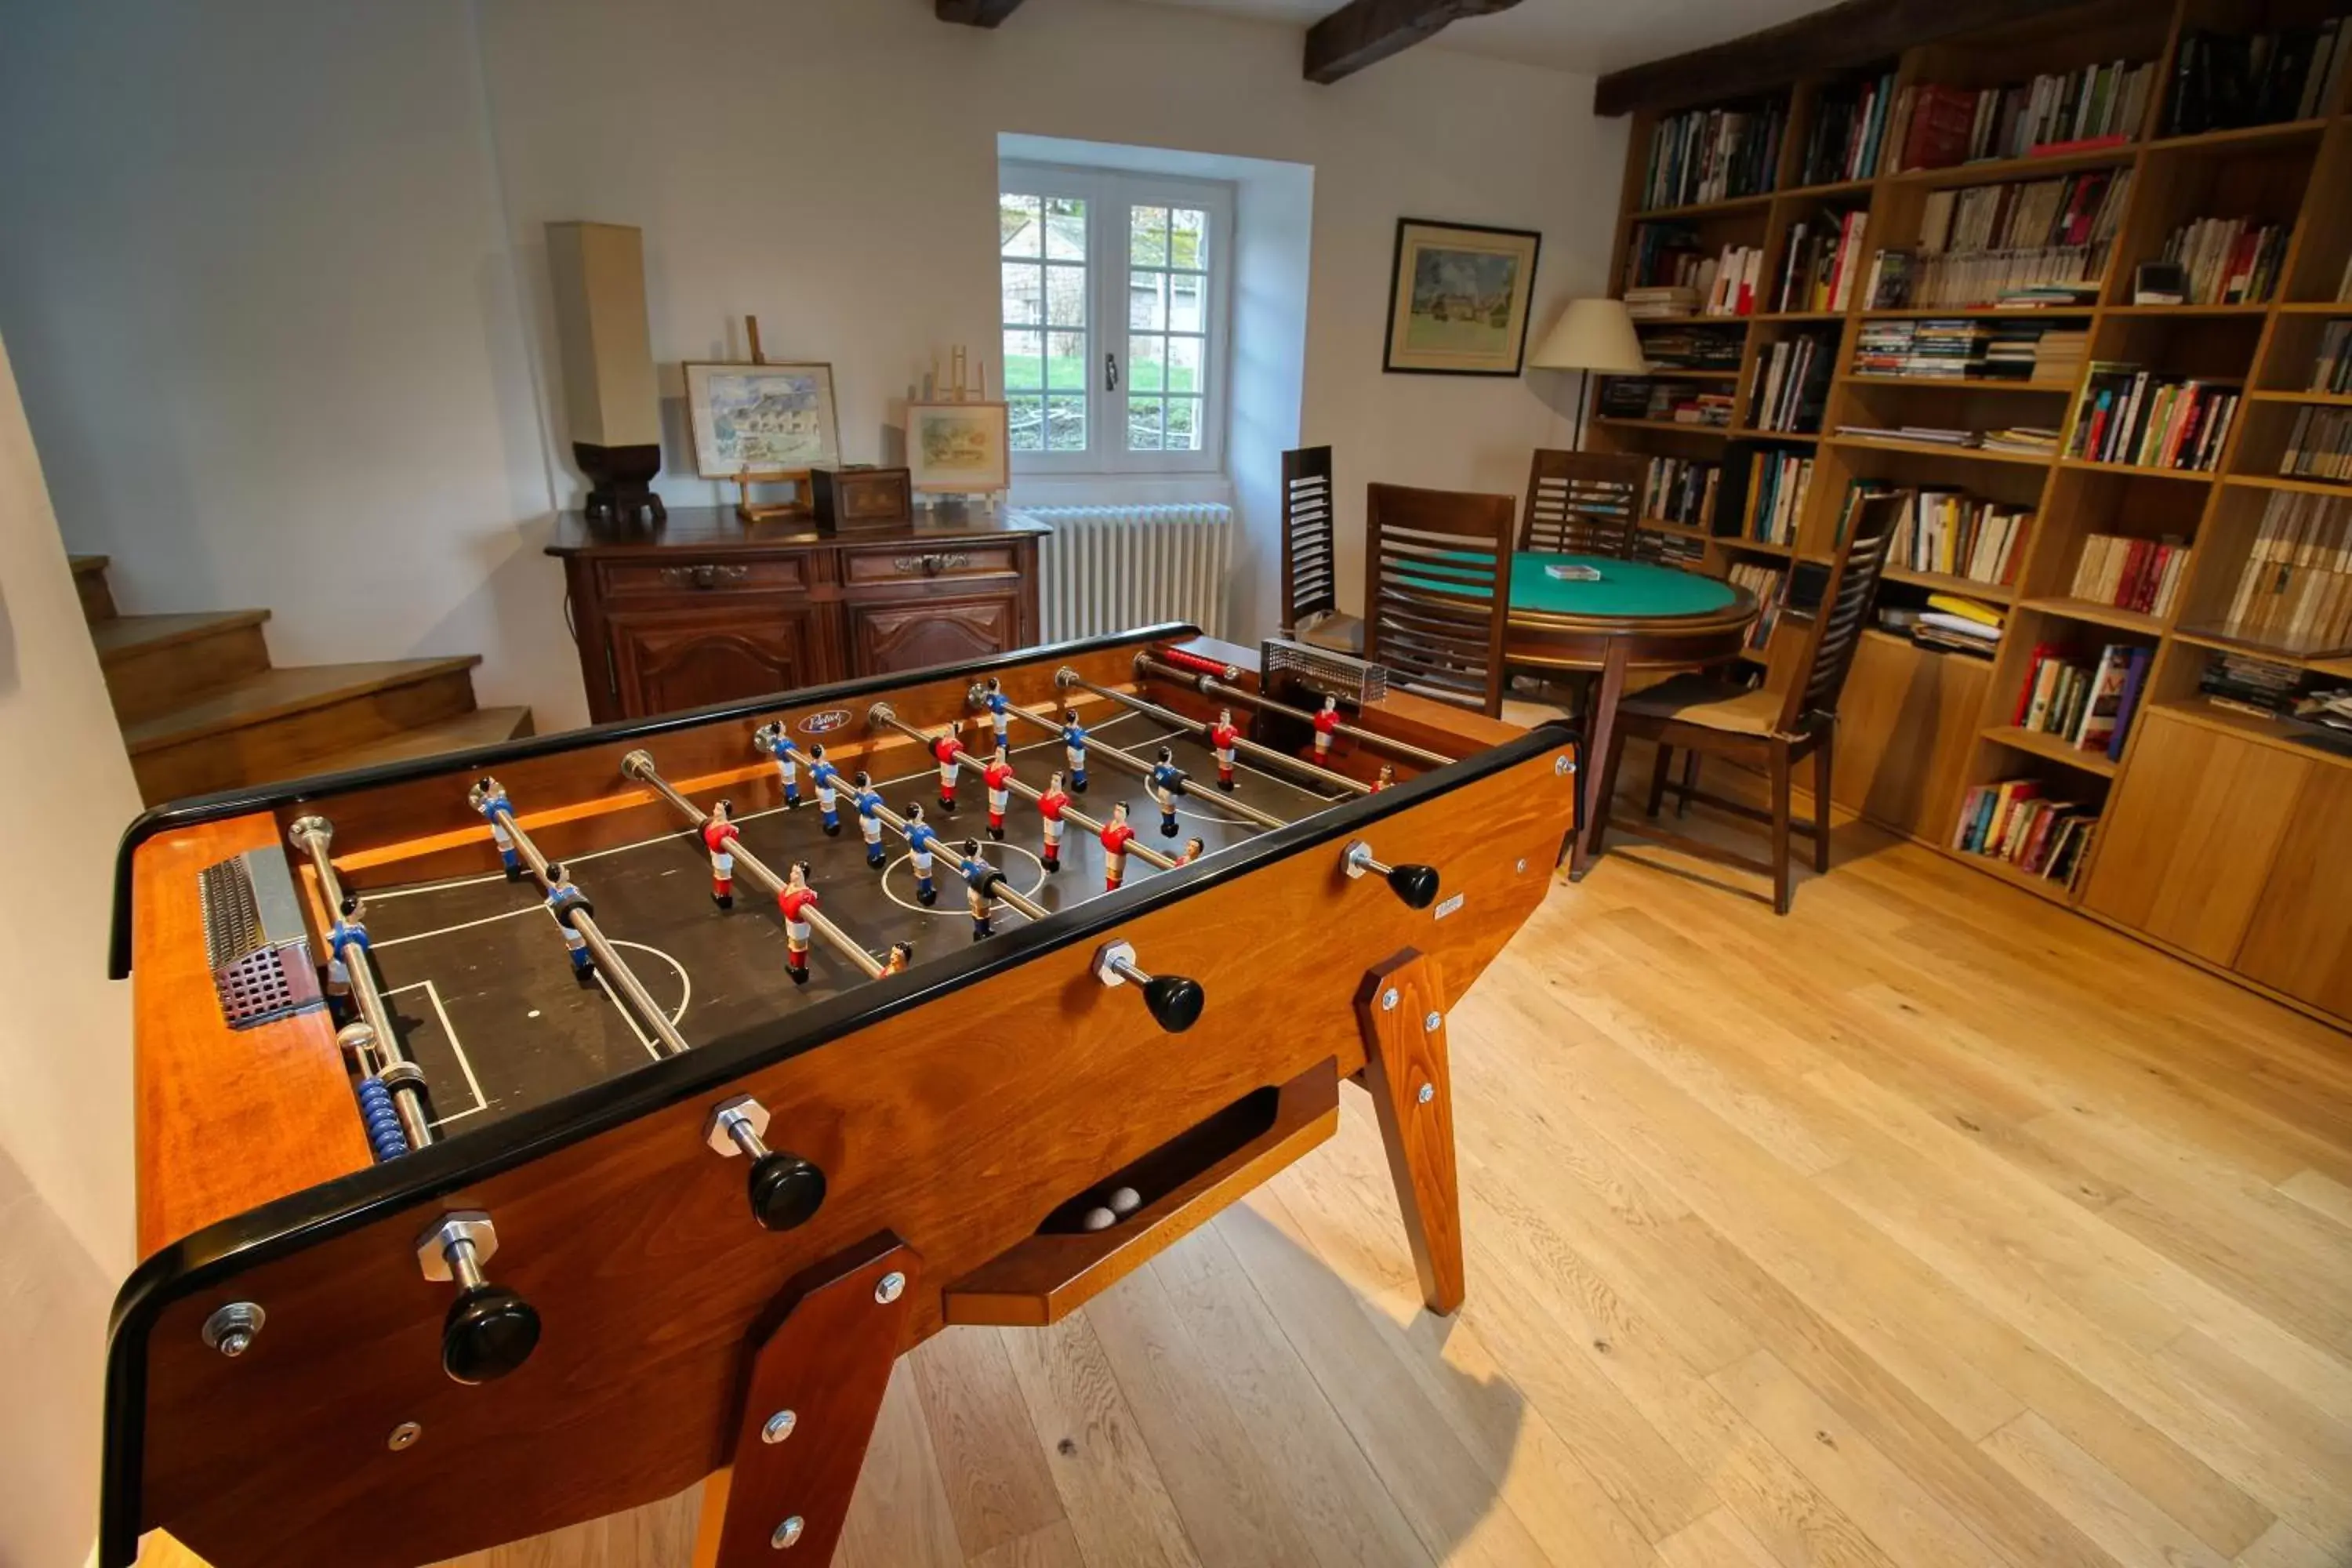 Game Room, Other Activities in KERBELEG, ferme-manoir du XVè siècle, chambres grand confort